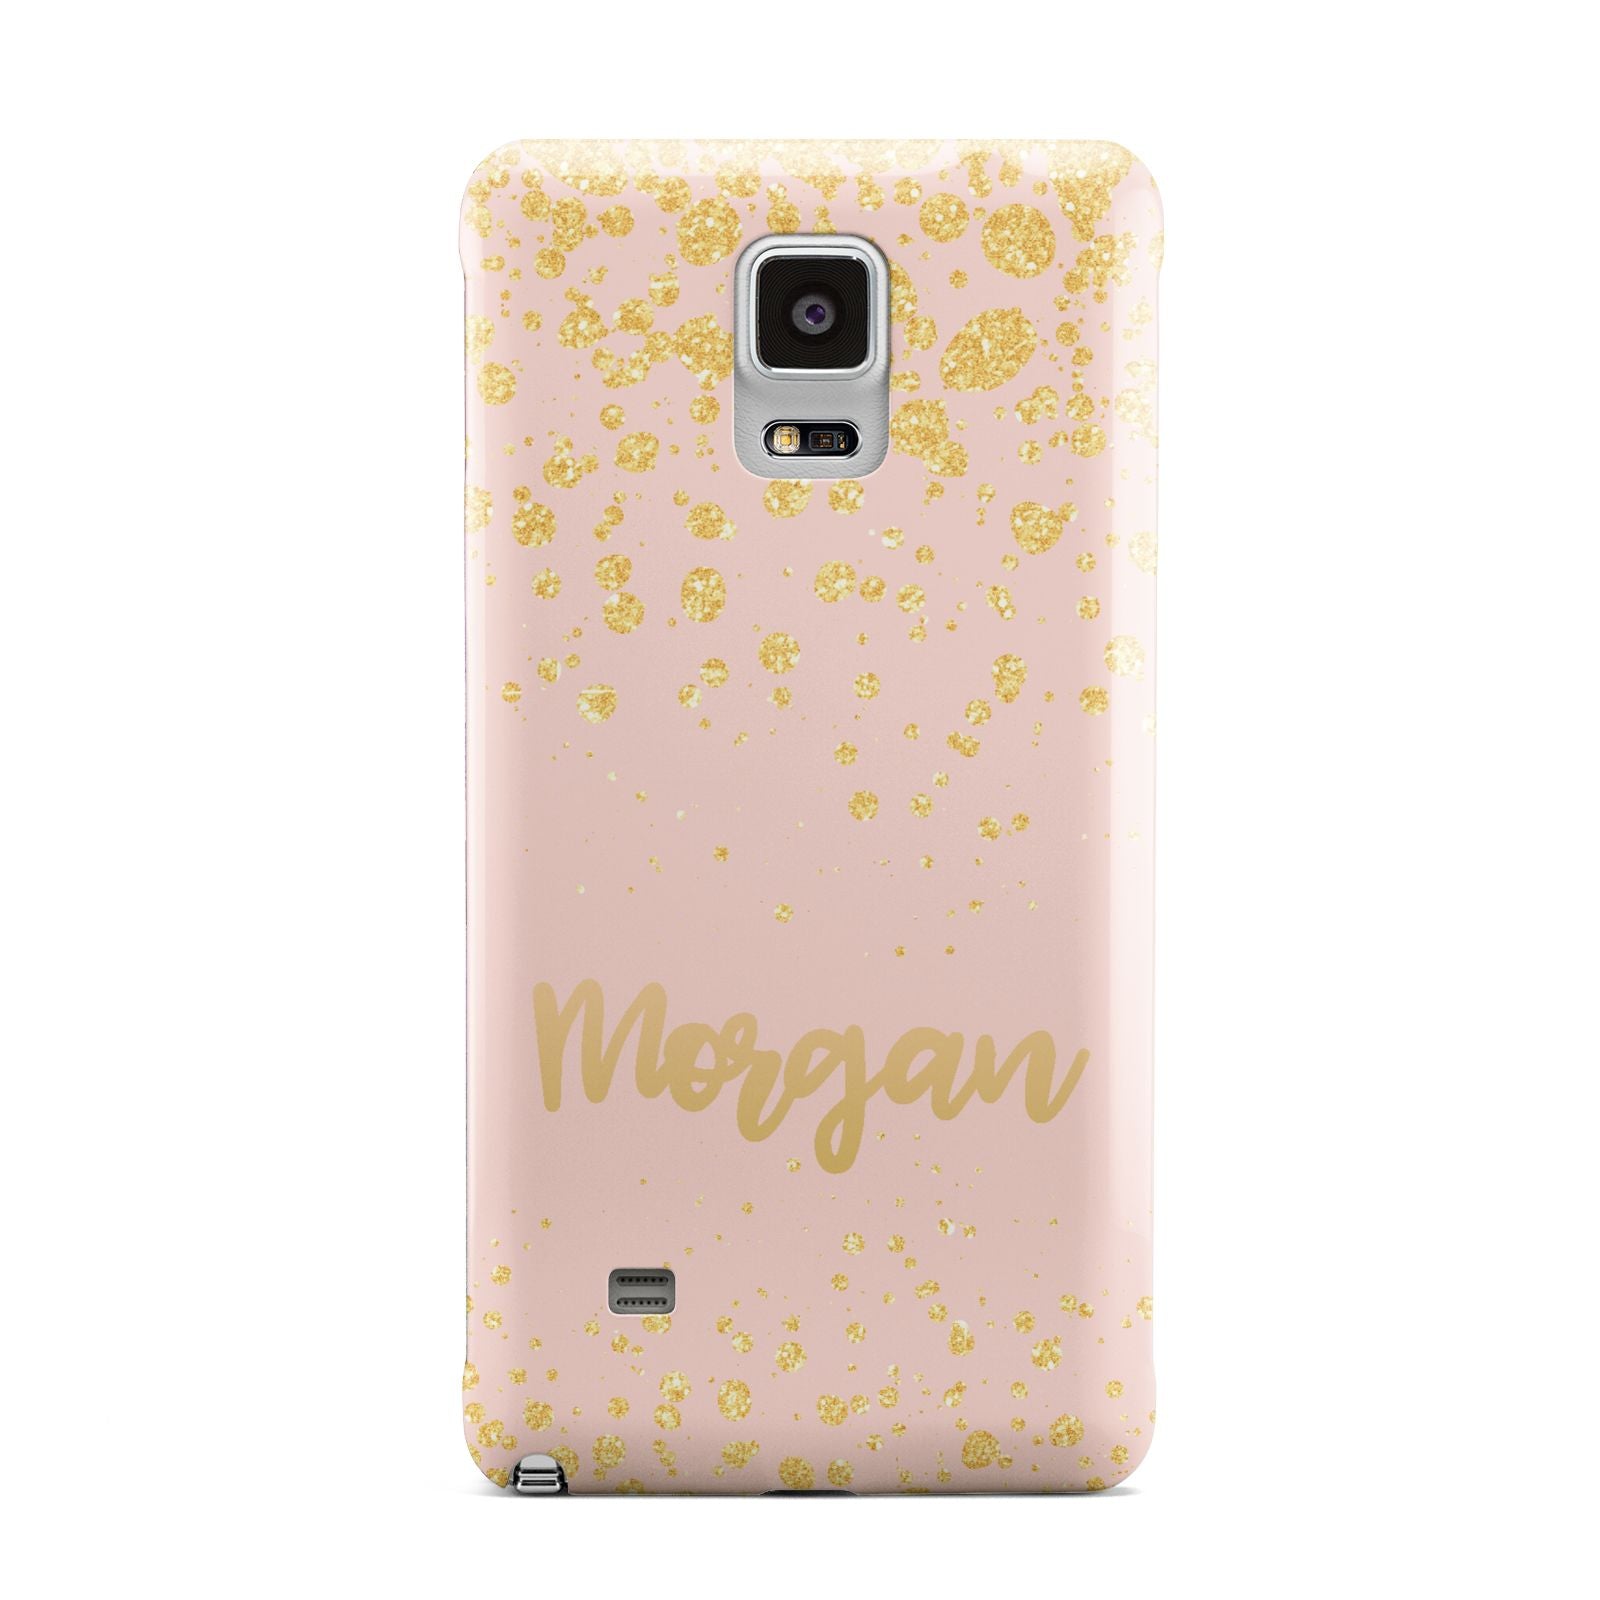 Personalised Pink Gold Splatter With Name Samsung Galaxy Note 4 Case